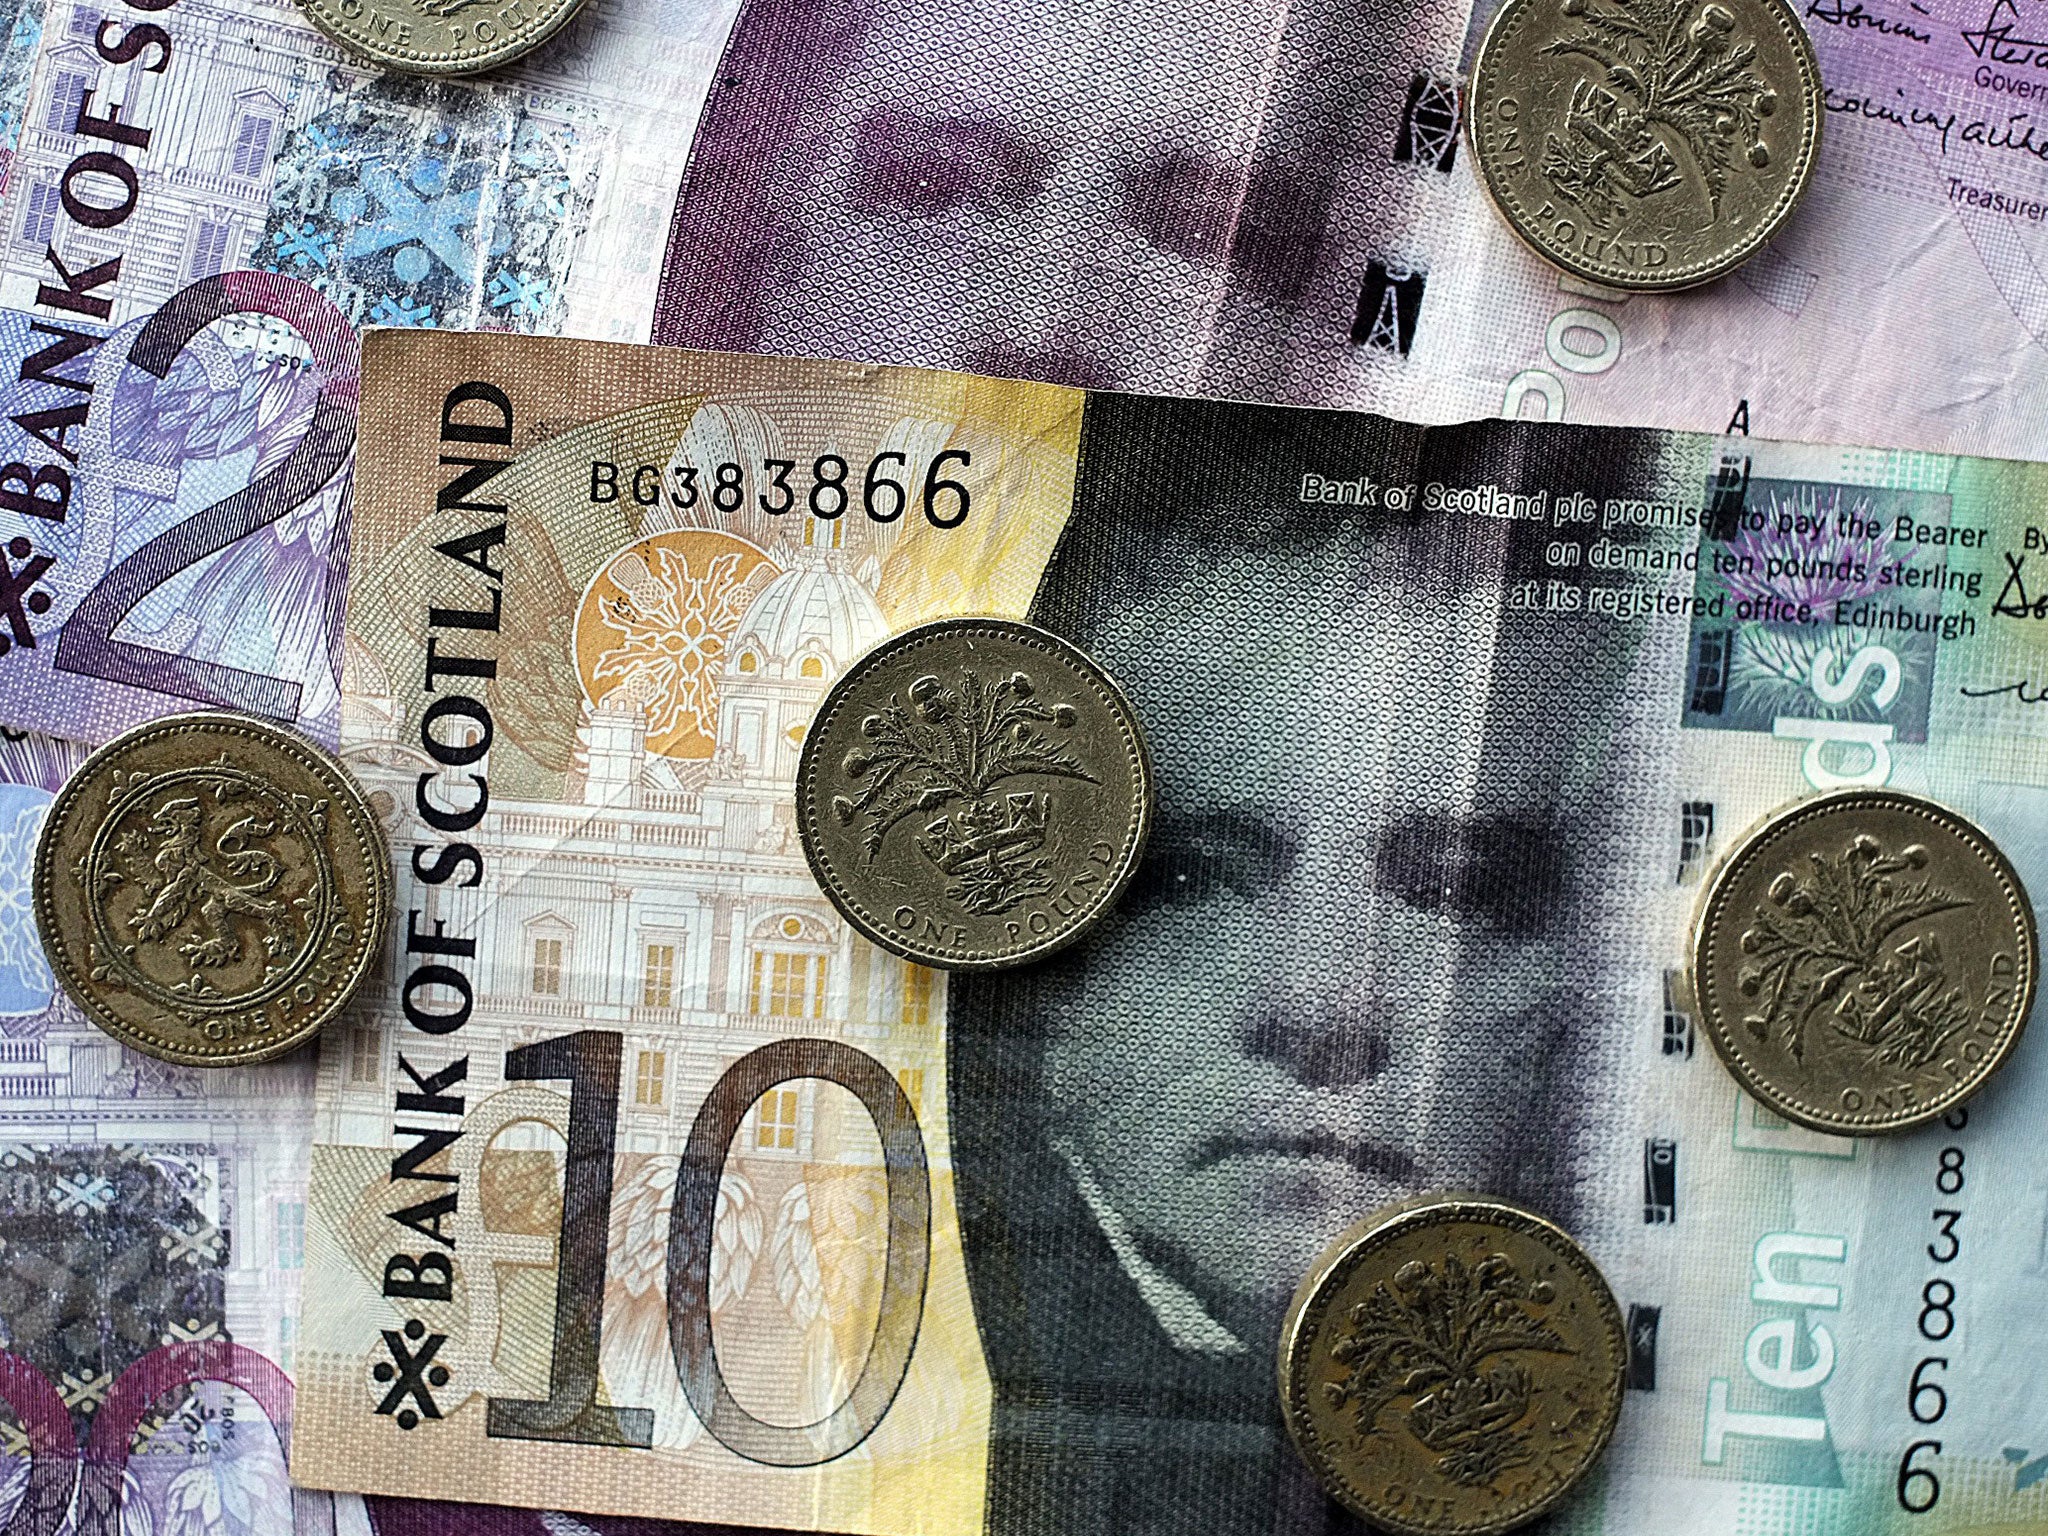 An arrangement of Scottish pound sterling banknotes and pound coins showing the thistle of Scotland